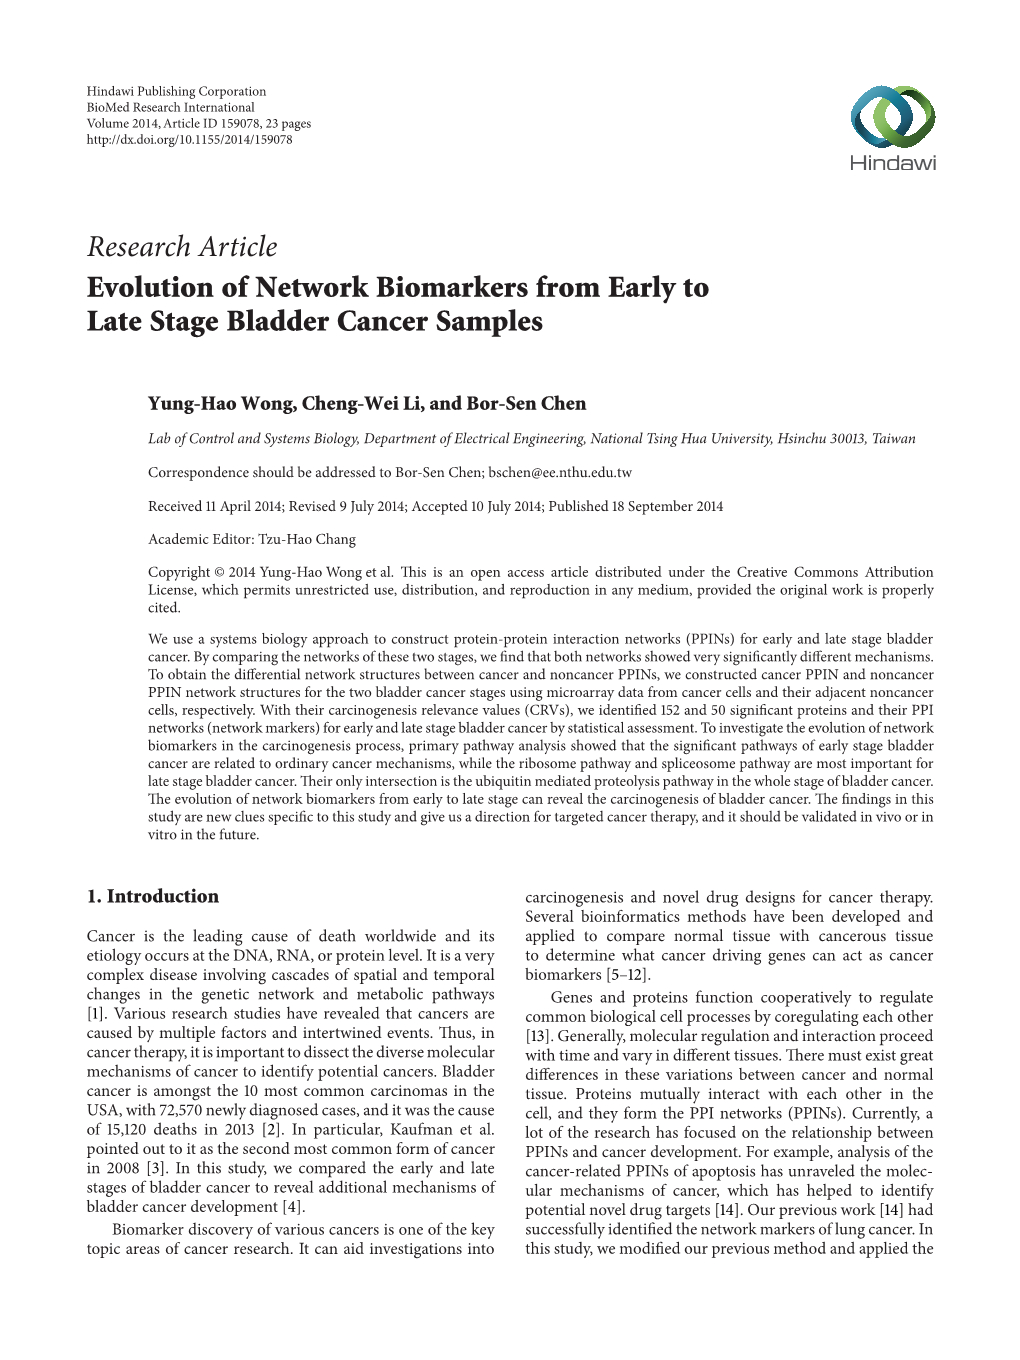 Evolution of Network Biomarkers from Early to Late Stage Bladder Cancer Samples